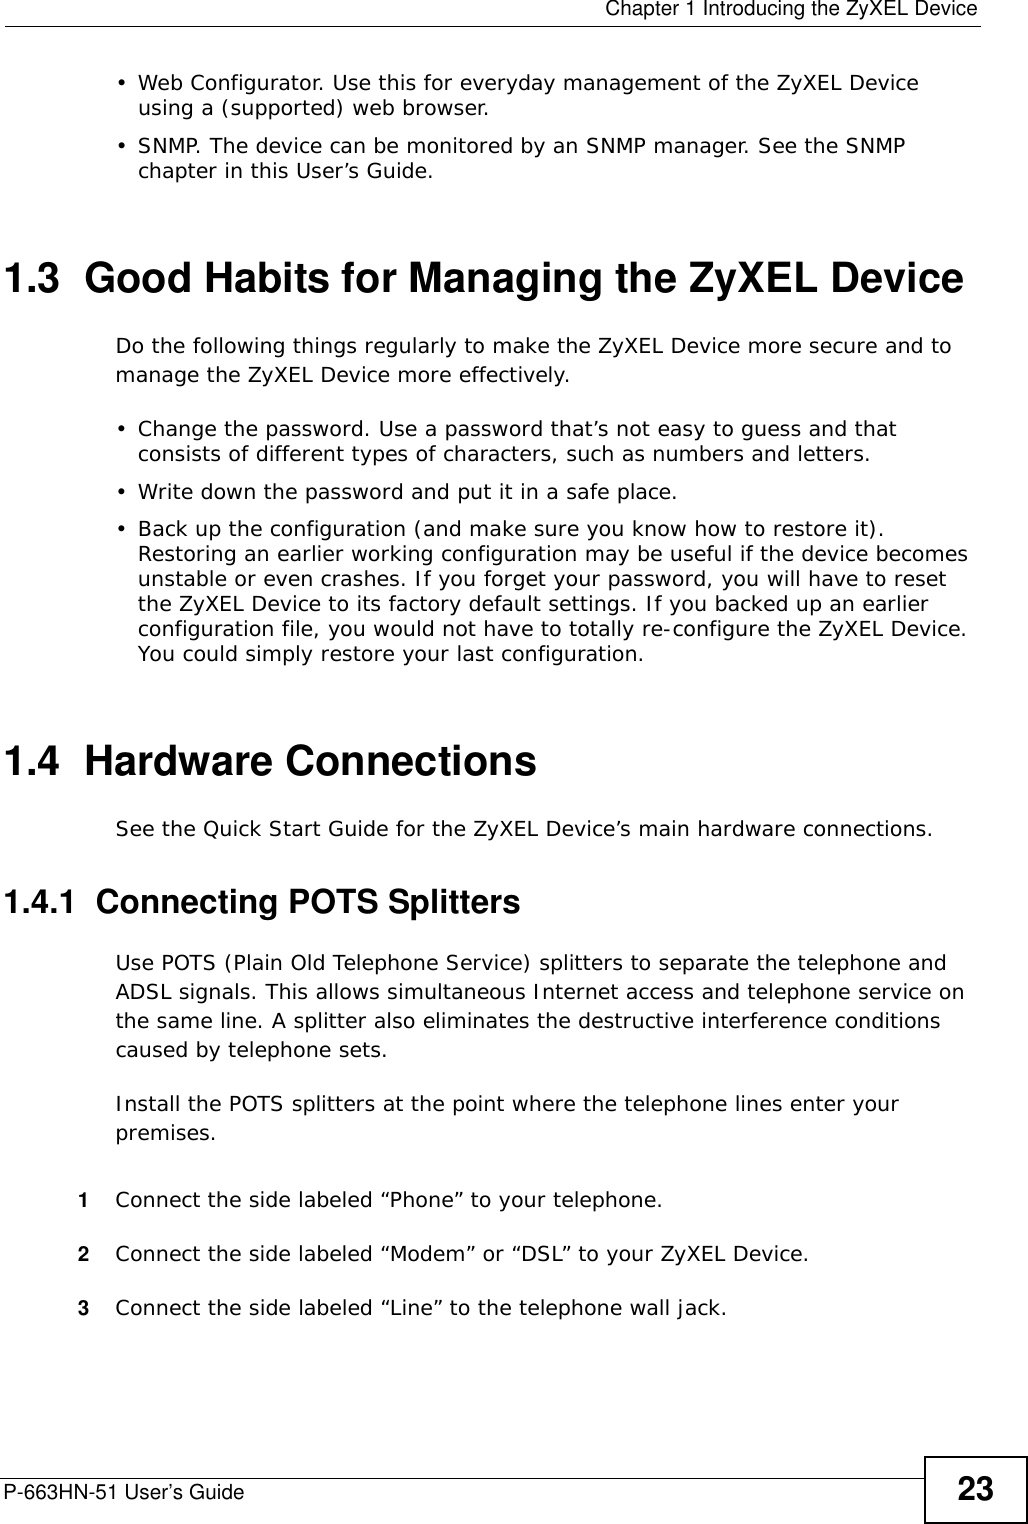  Chapter 1 Introducing the ZyXEL DeviceP-663HN-51 User’s Guide 23• Web Configurator. Use this for everyday management of the ZyXEL Device using a (supported) web browser.• SNMP. The device can be monitored by an SNMP manager. See the SNMP chapter in this User’s Guide.1.3  Good Habits for Managing the ZyXEL DeviceDo the following things regularly to make the ZyXEL Device more secure and to manage the ZyXEL Device more effectively.• Change the password. Use a password that’s not easy to guess and that consists of different types of characters, such as numbers and letters.• Write down the password and put it in a safe place.• Back up the configuration (and make sure you know how to restore it). Restoring an earlier working configuration may be useful if the device becomes unstable or even crashes. If you forget your password, you will have to reset the ZyXEL Device to its factory default settings. If you backed up an earlier configuration file, you would not have to totally re-configure the ZyXEL Device. You could simply restore your last configuration.1.4  Hardware ConnectionsSee the Quick Start Guide for the ZyXEL Device’s main hardware connections. 1.4.1  Connecting POTS SplittersUse POTS (Plain Old Telephone Service) splitters to separate the telephone and ADSL signals. This allows simultaneous Internet access and telephone service on the same line. A splitter also eliminates the destructive interference conditions caused by telephone sets. Install the POTS splitters at the point where the telephone lines enter your premises.1Connect the side labeled “Phone” to your telephone.2Connect the side labeled “Modem” or “DSL” to your ZyXEL Device.3Connect the side labeled “Line” to the telephone wall jack.